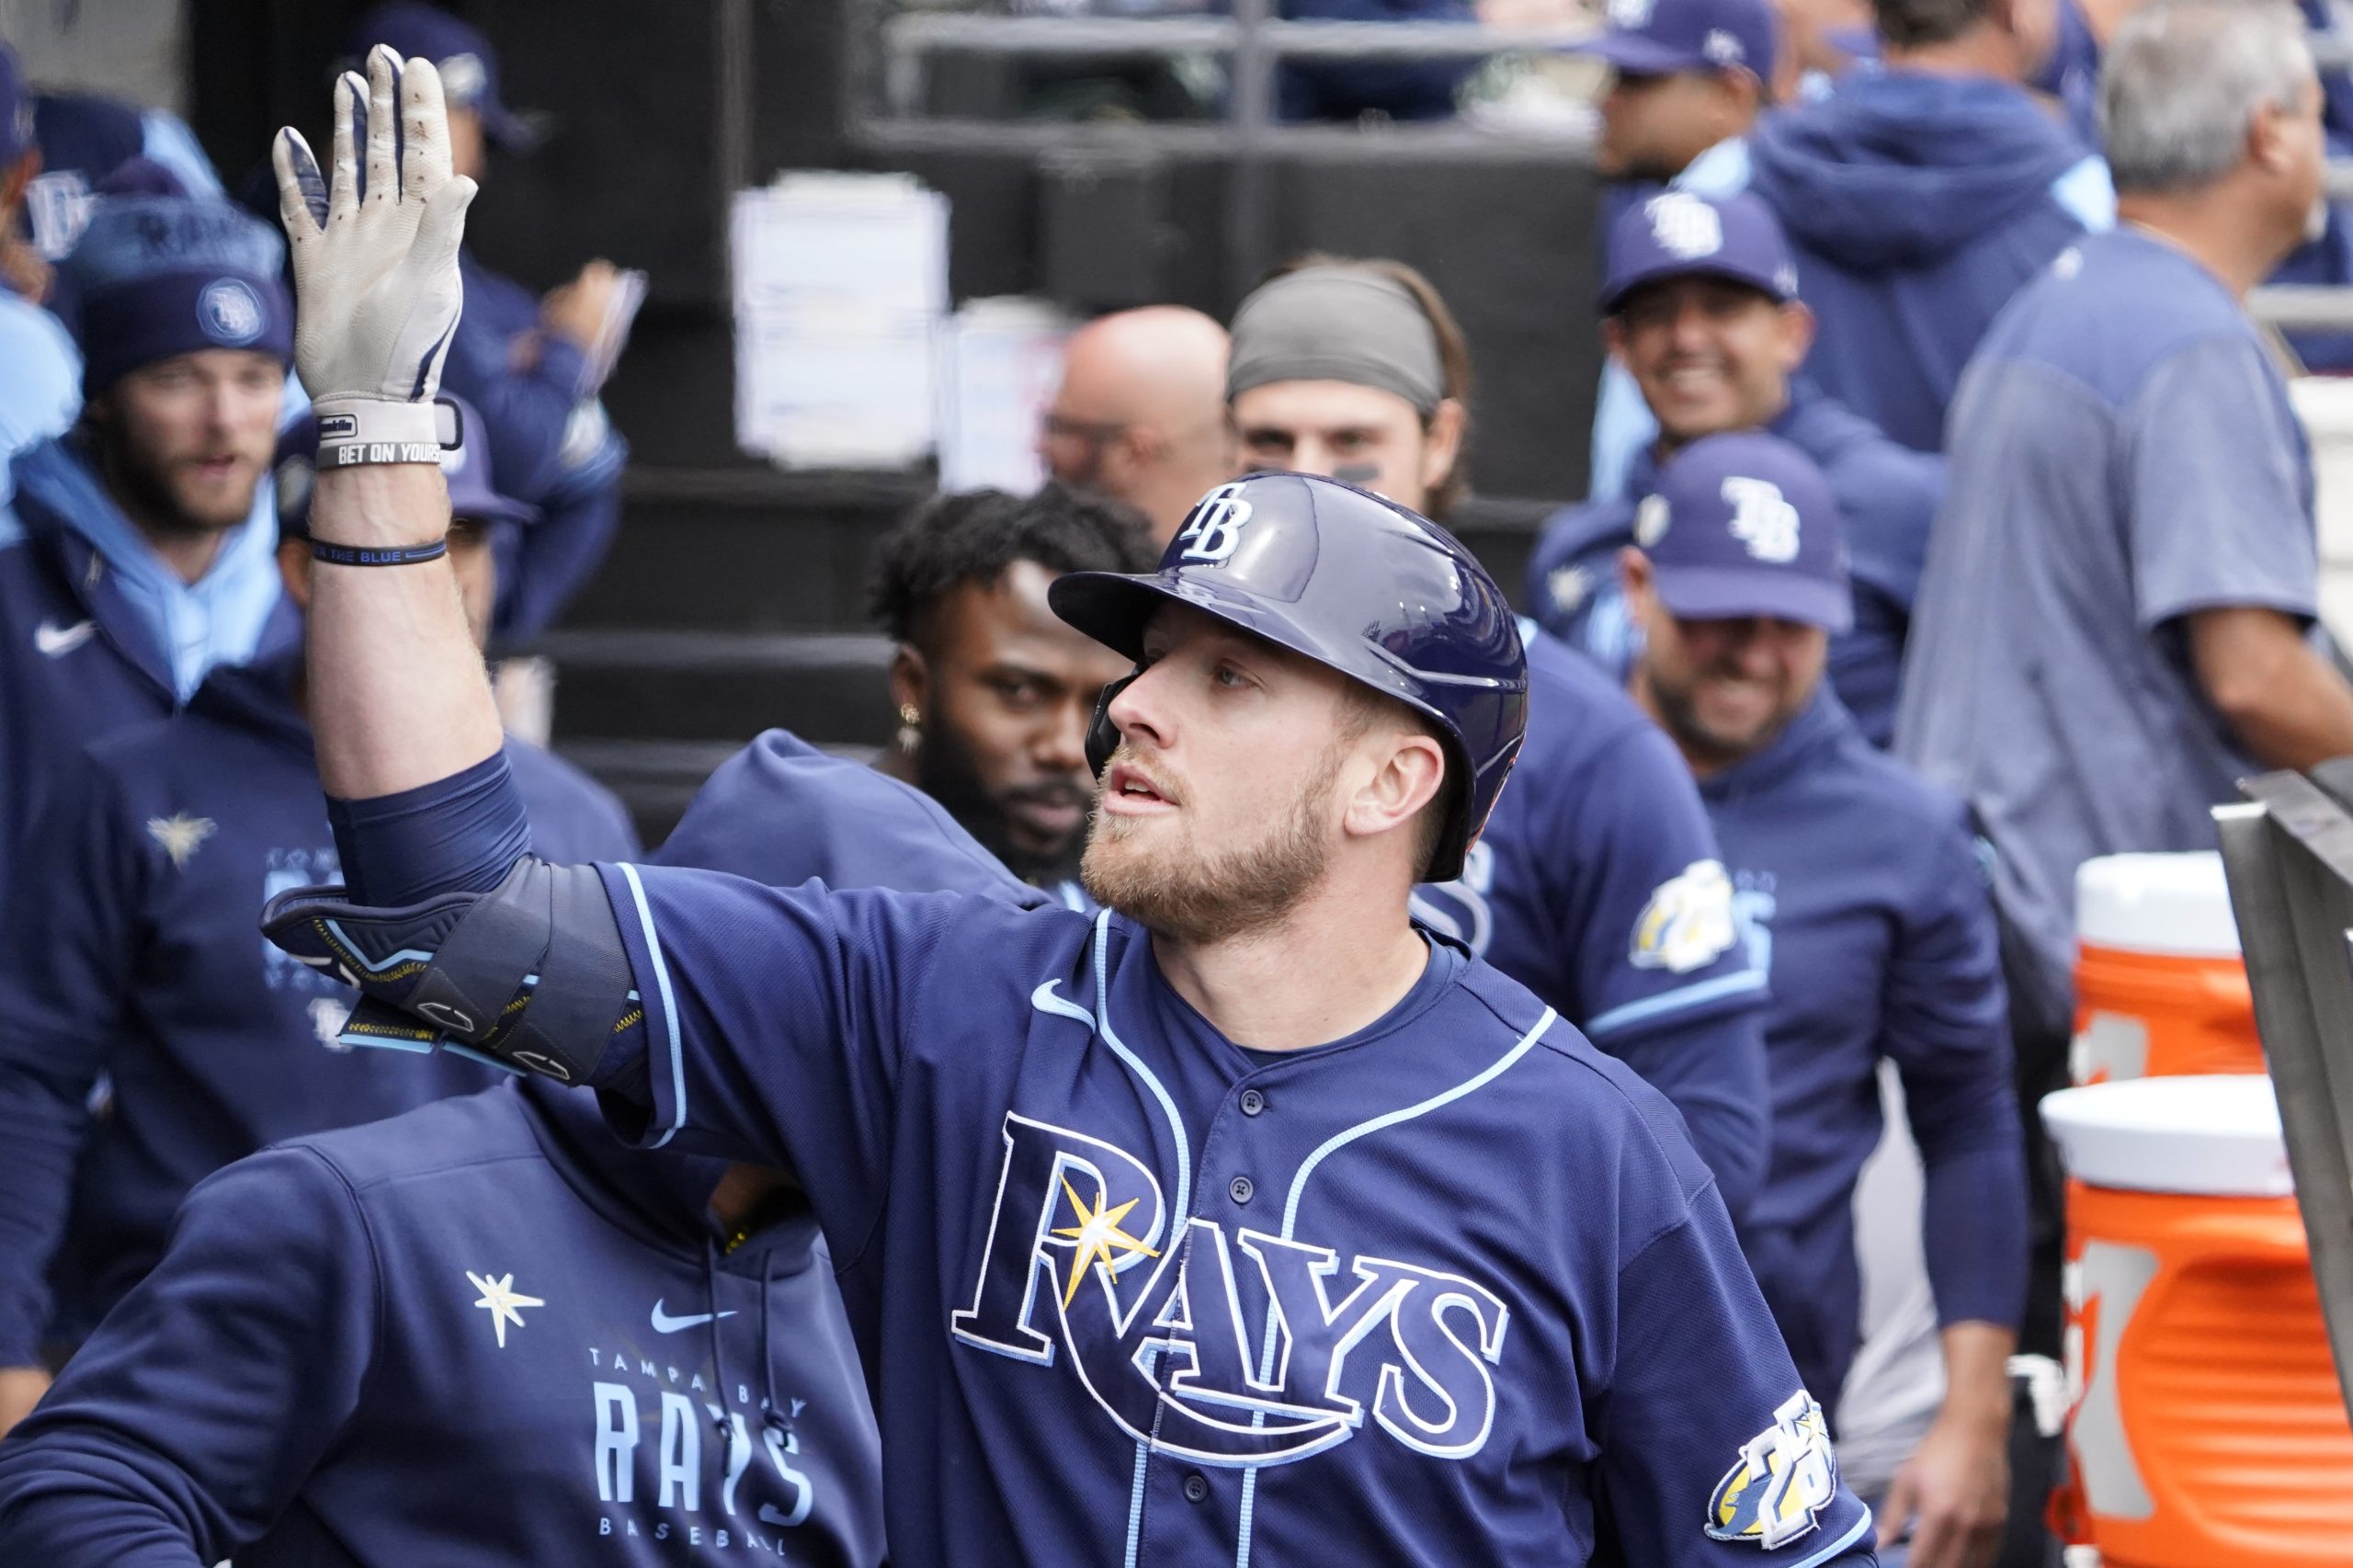 The Rays' Dominance Goes Even Deeper Than Their 13-0 Start